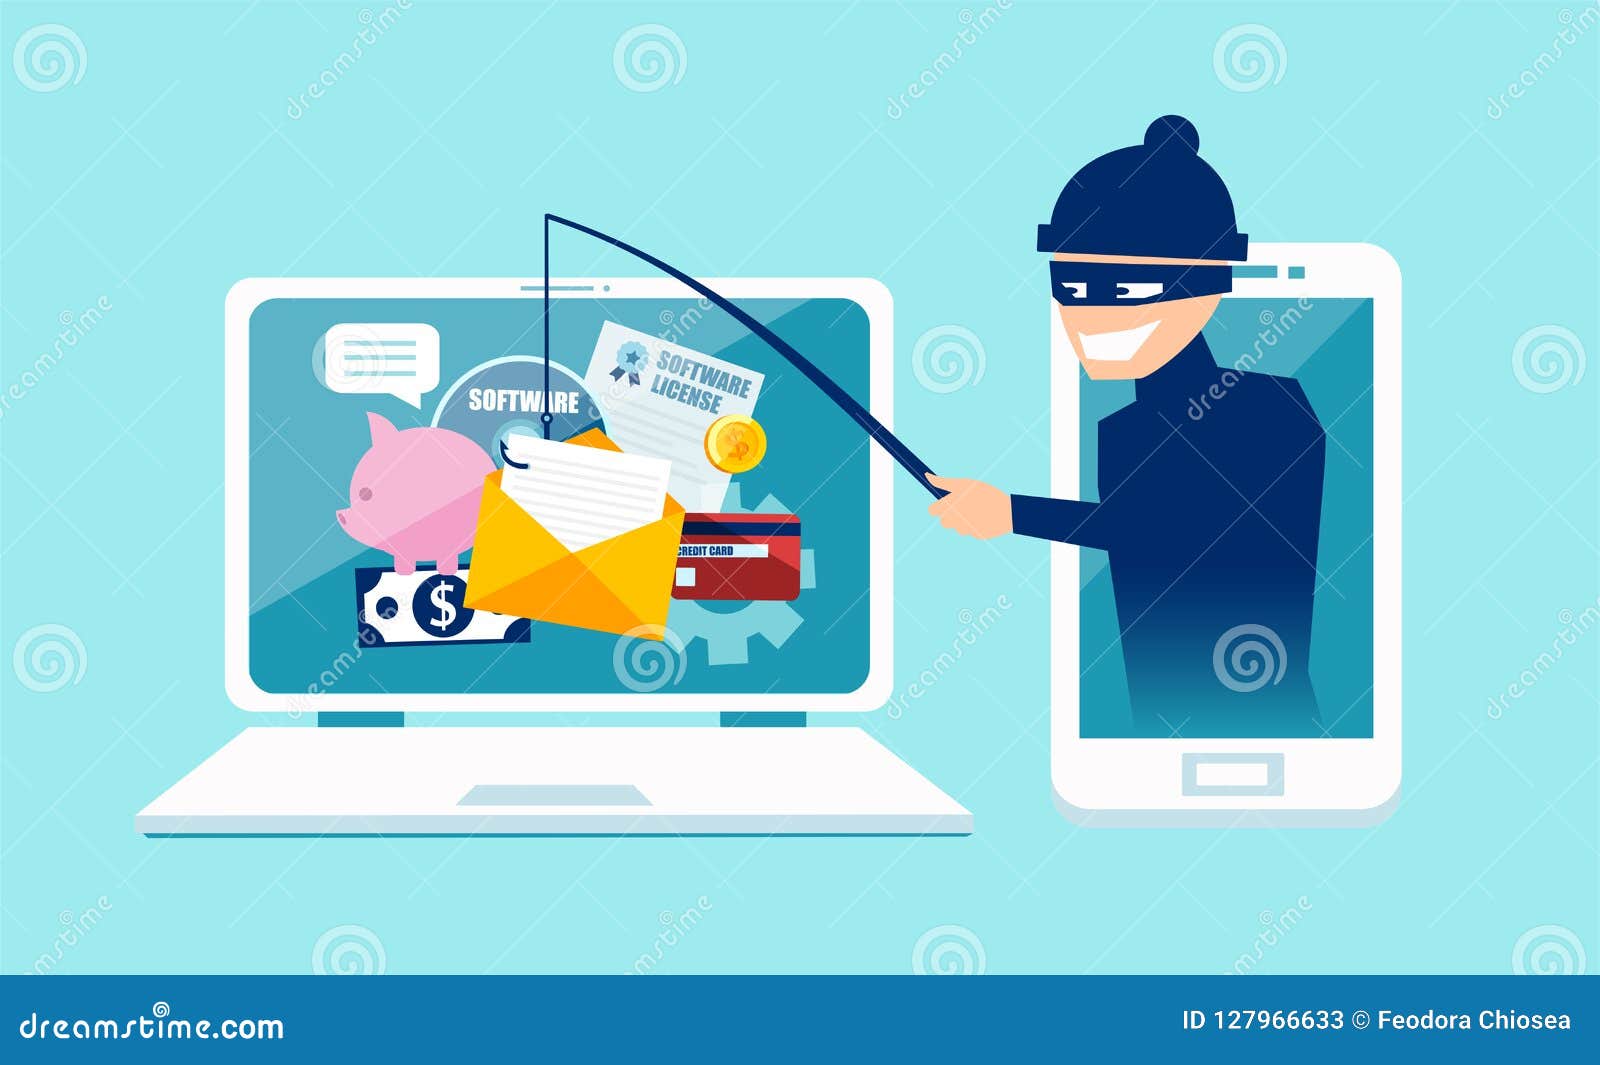  concept of phishing scam, hacker attack and web security